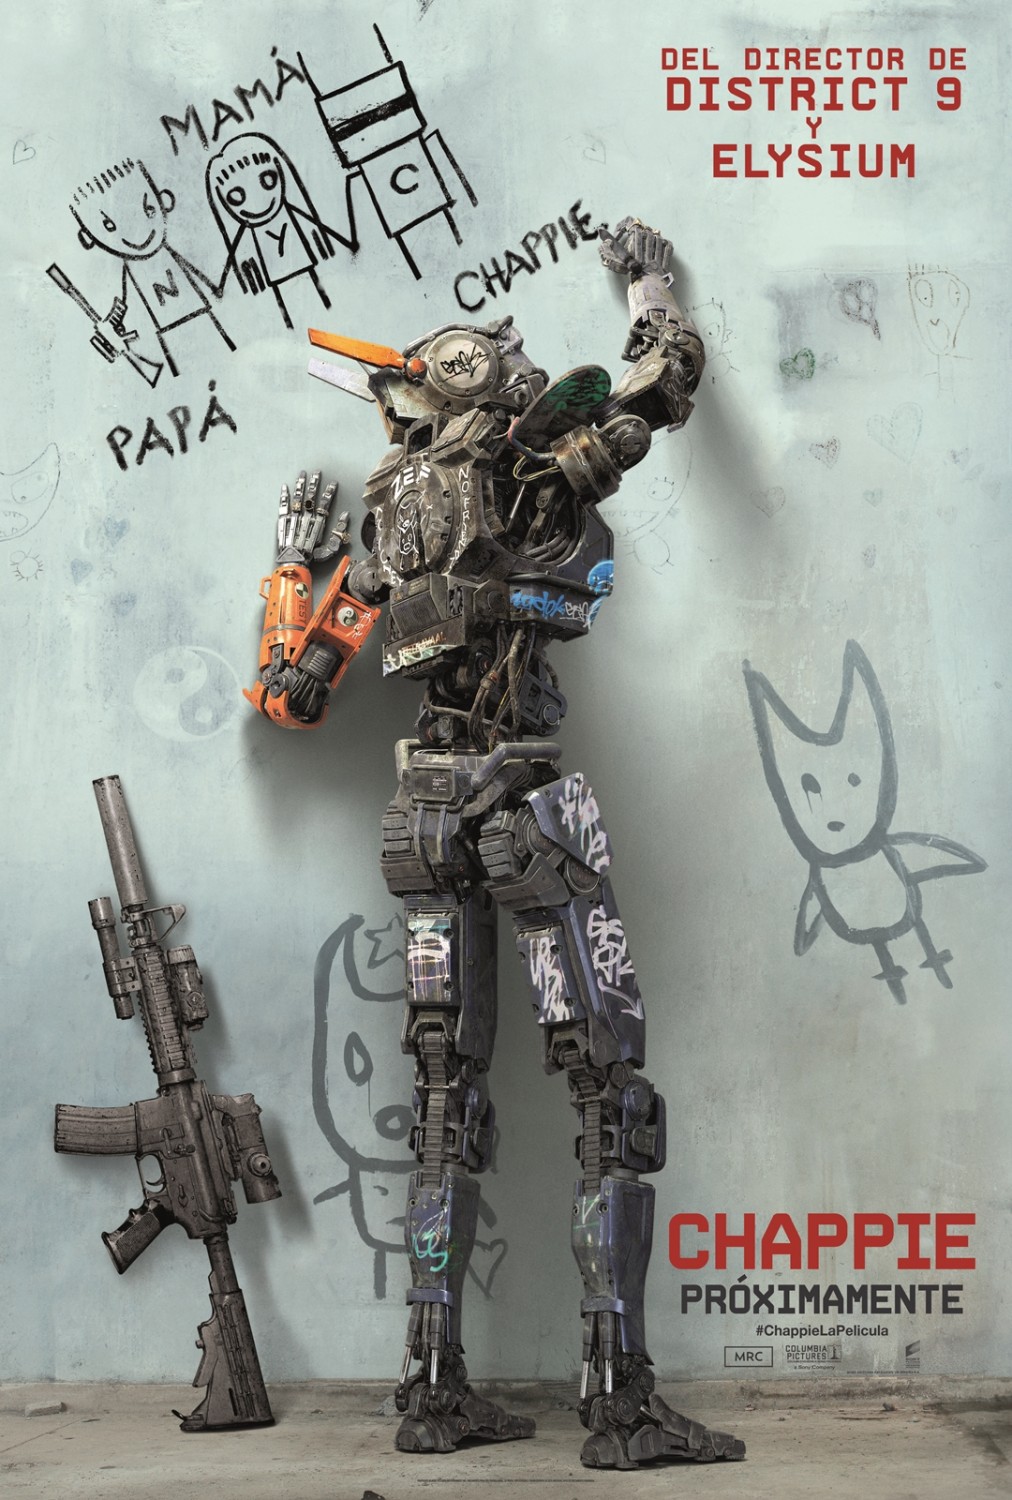 CHAPPIE: Extra Large Movie Poster Image - Internet Movie Poster.